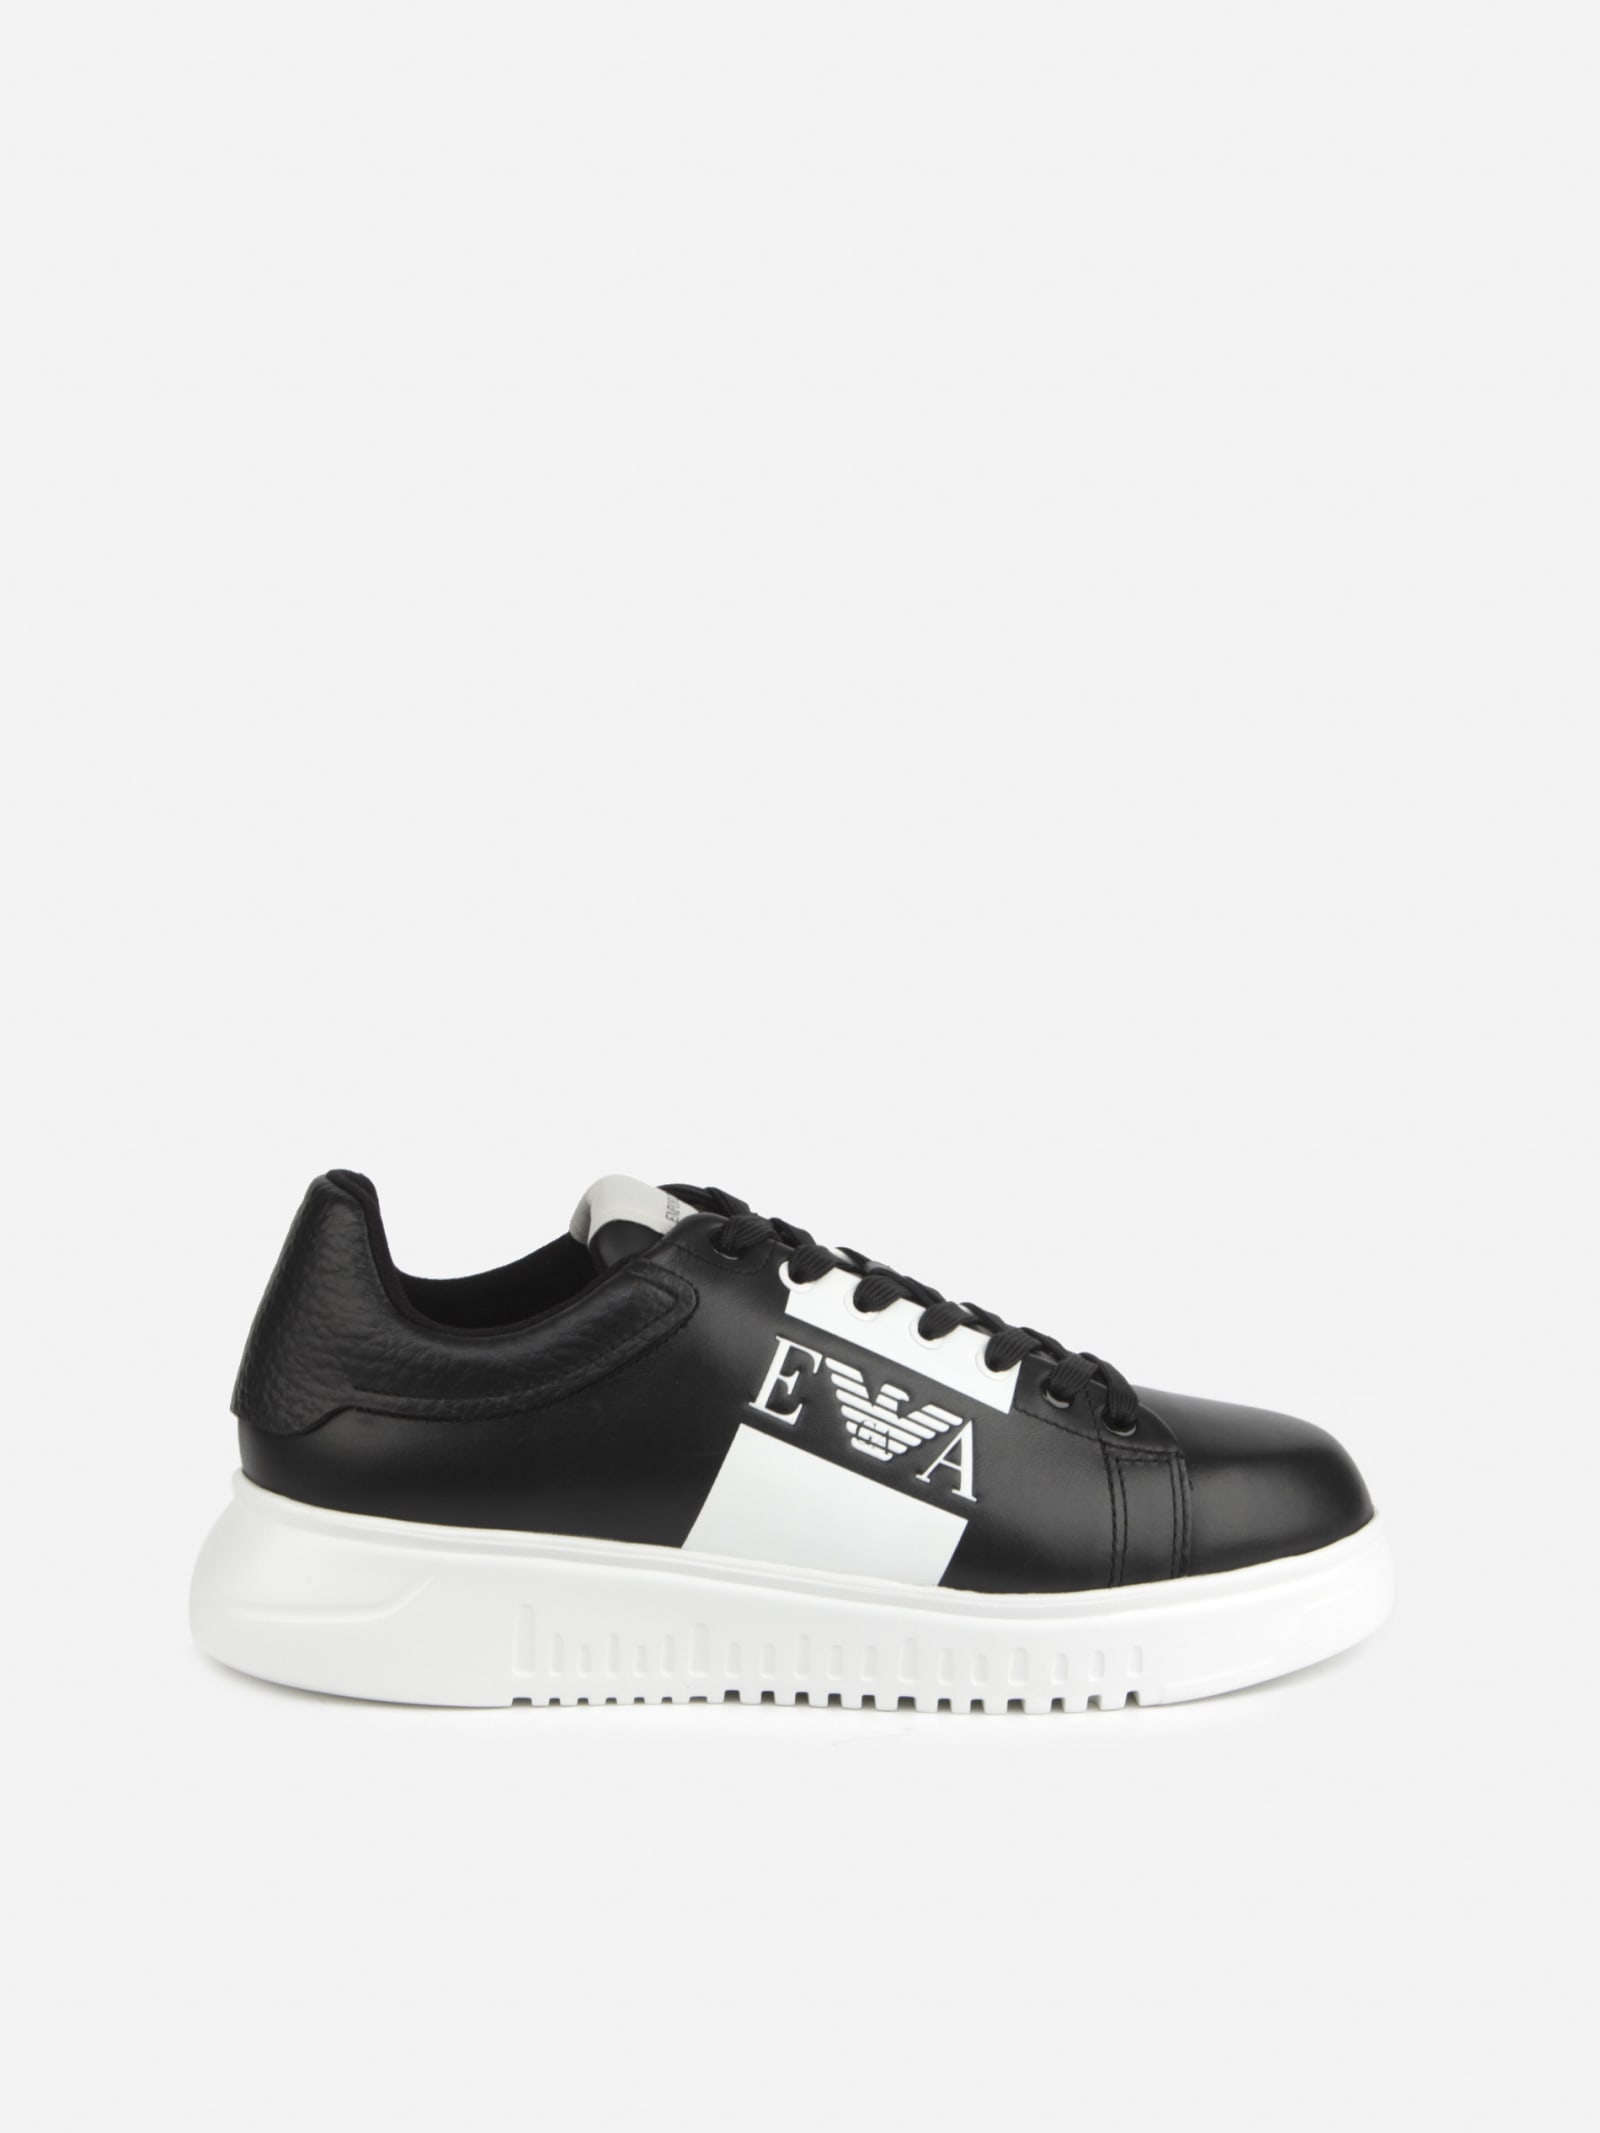 Emporio Armani Leather Sneakers With Contrasting Logo Detail